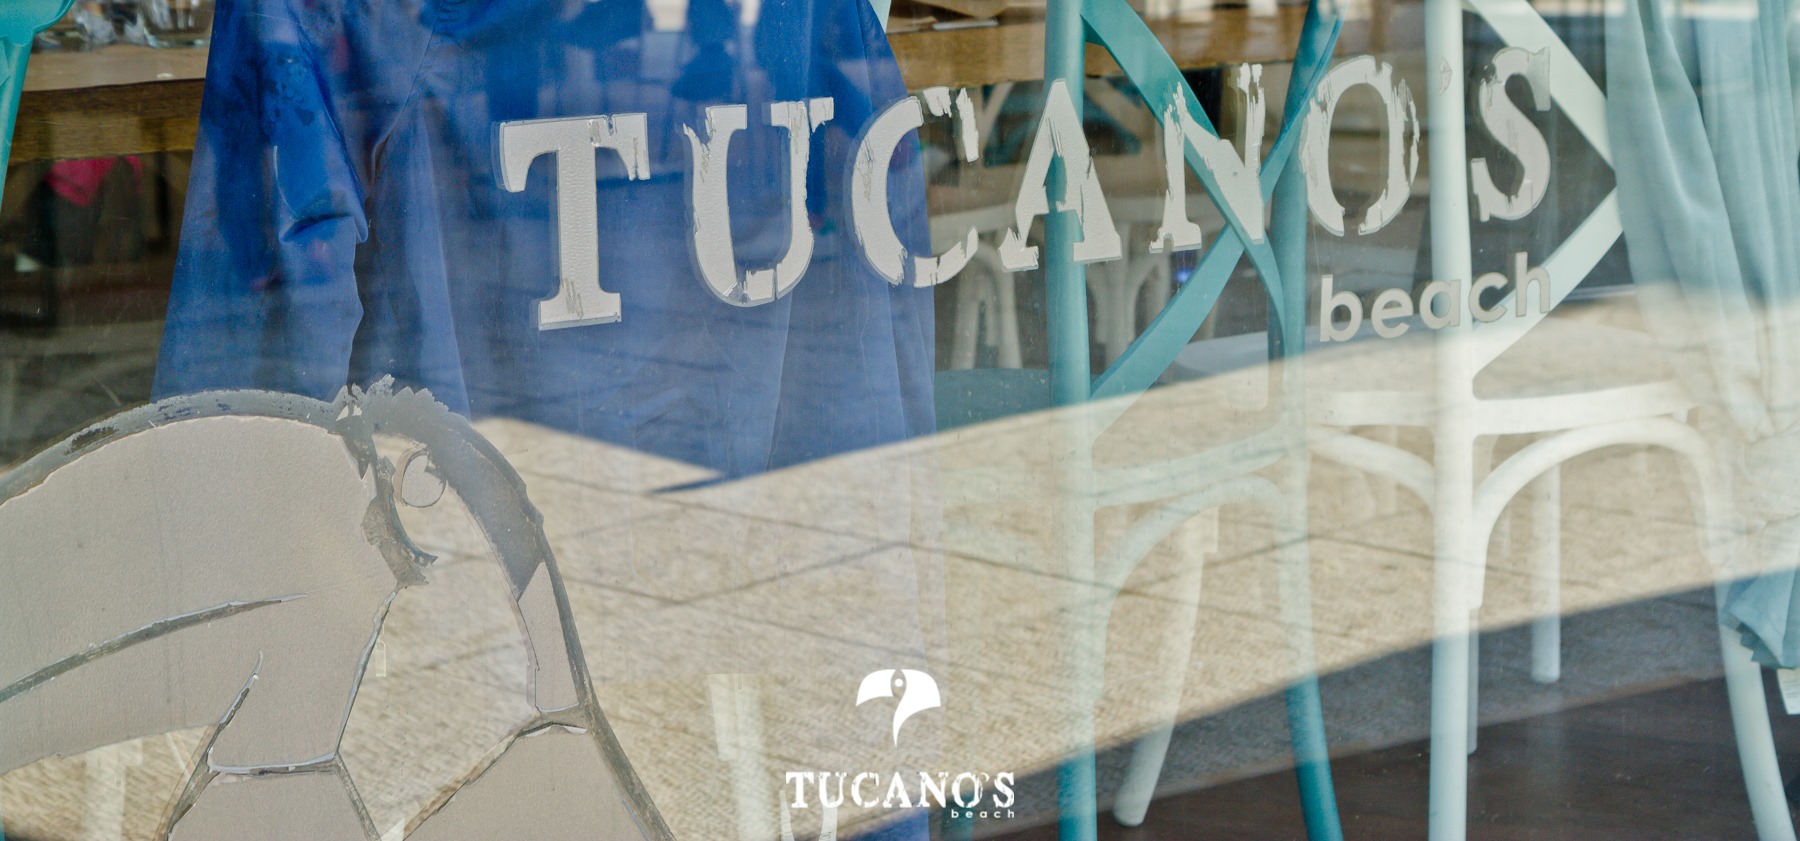 Tucano's Beach Club, Opening Party summer 2016